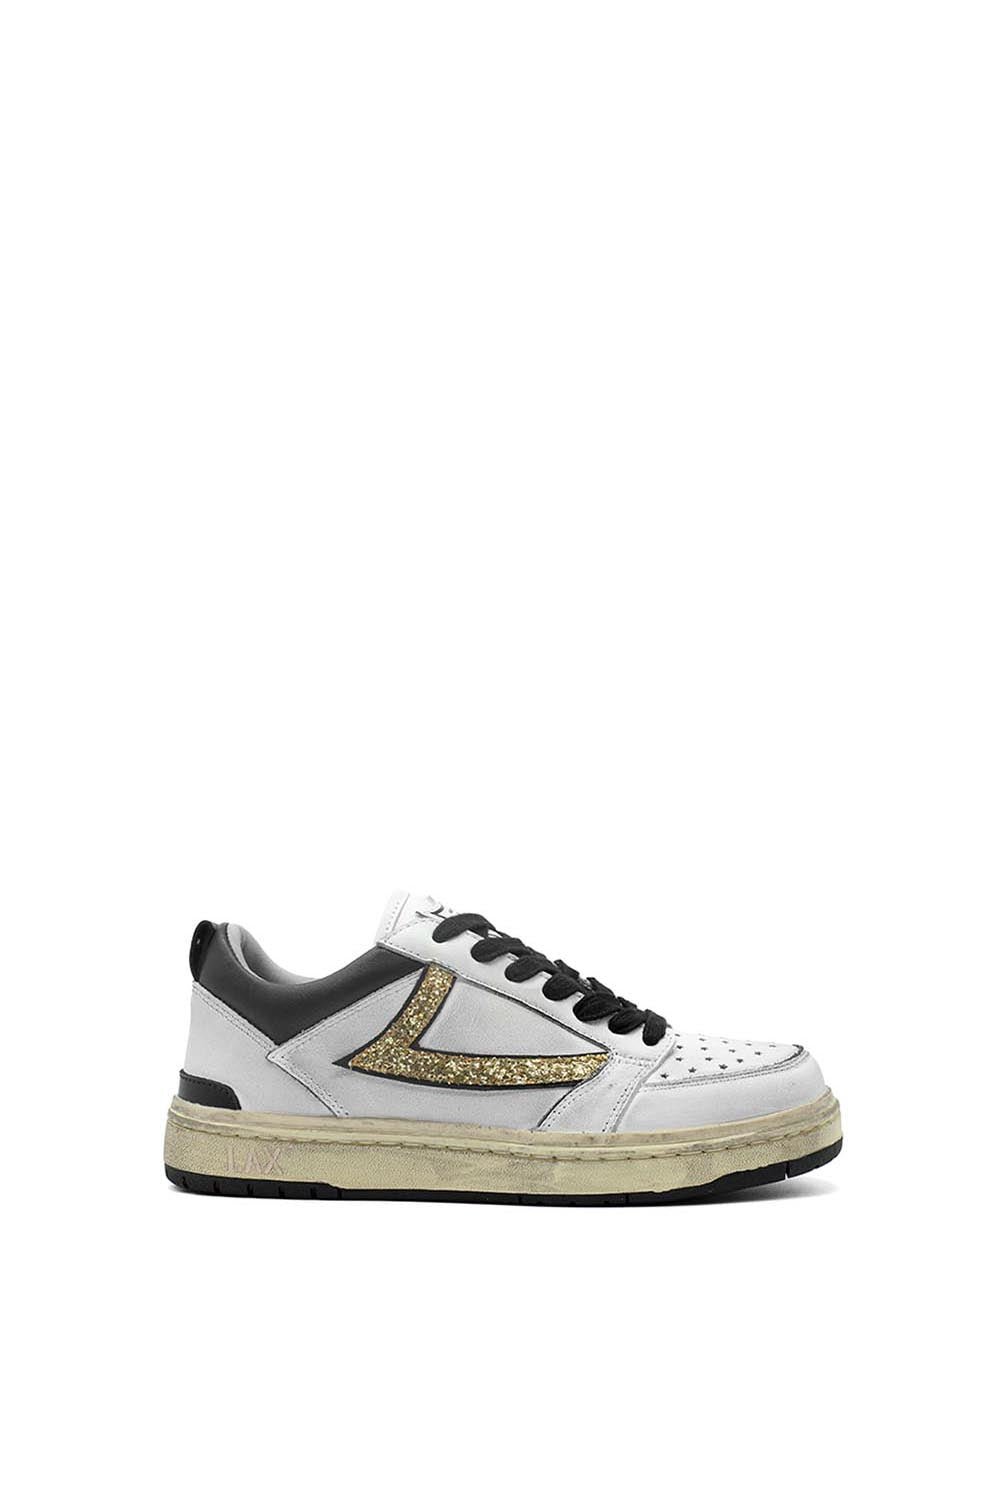 STARLIGHT GLITTER SHIELD LOW WOMAN Starlight Low Woman Sneakers, back pull loop with metal logo detail, front lace-up closure. Glitter Shield. 100% leather. WHITE/GOLD HTC LOS ANGELES